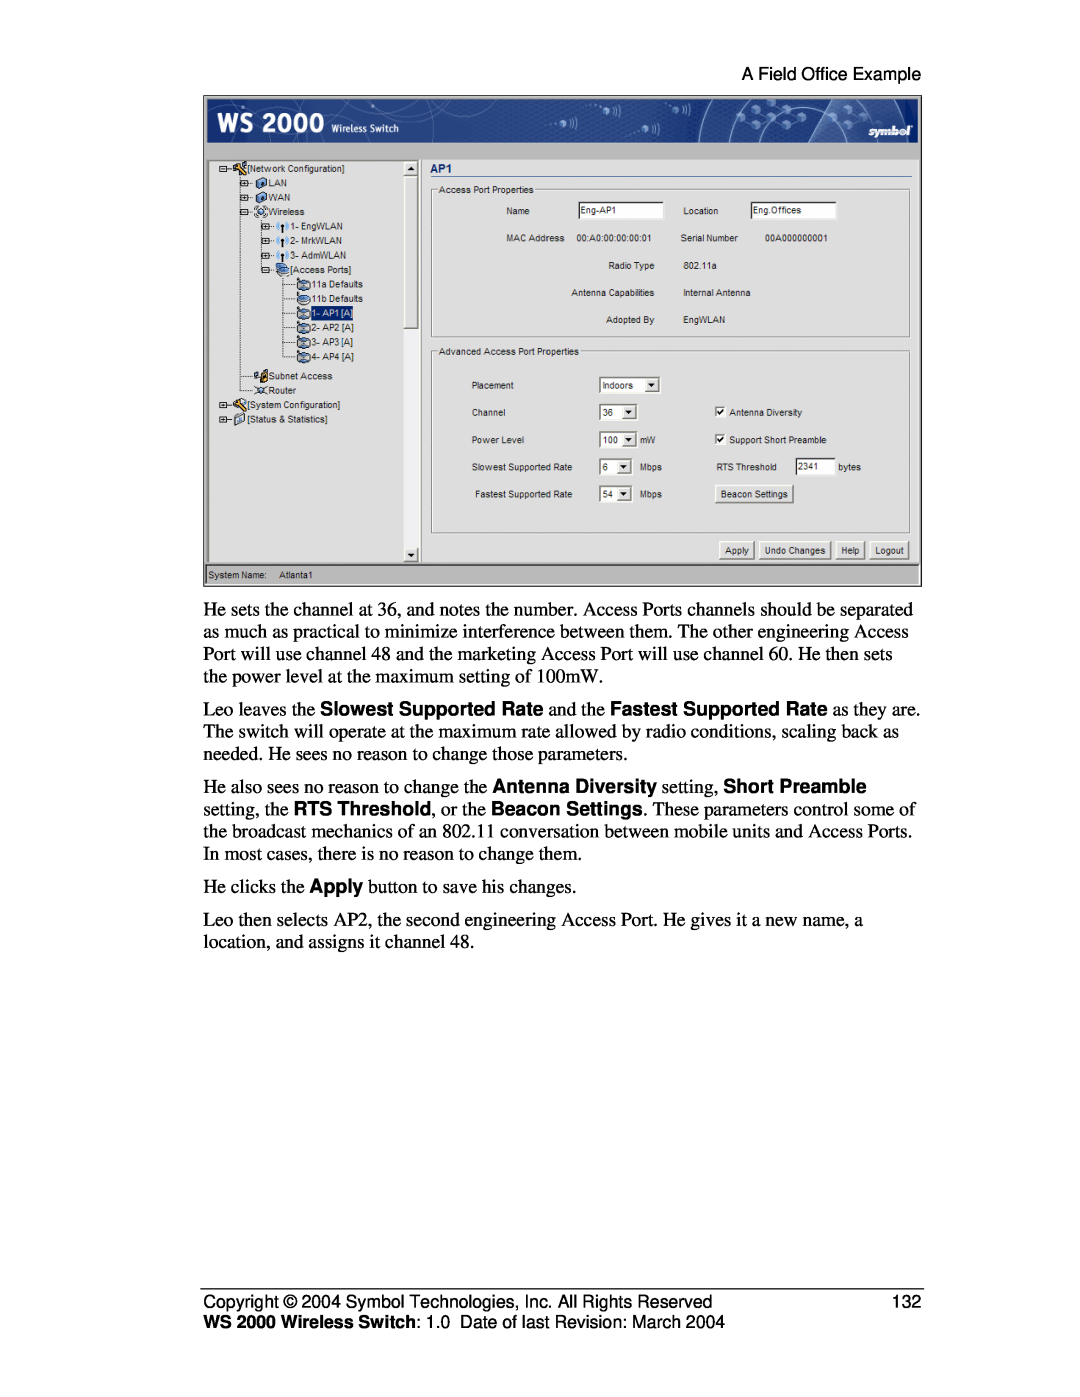 Symbol Technologies WS 2000 manual He clicks the Apply button to save his changes 